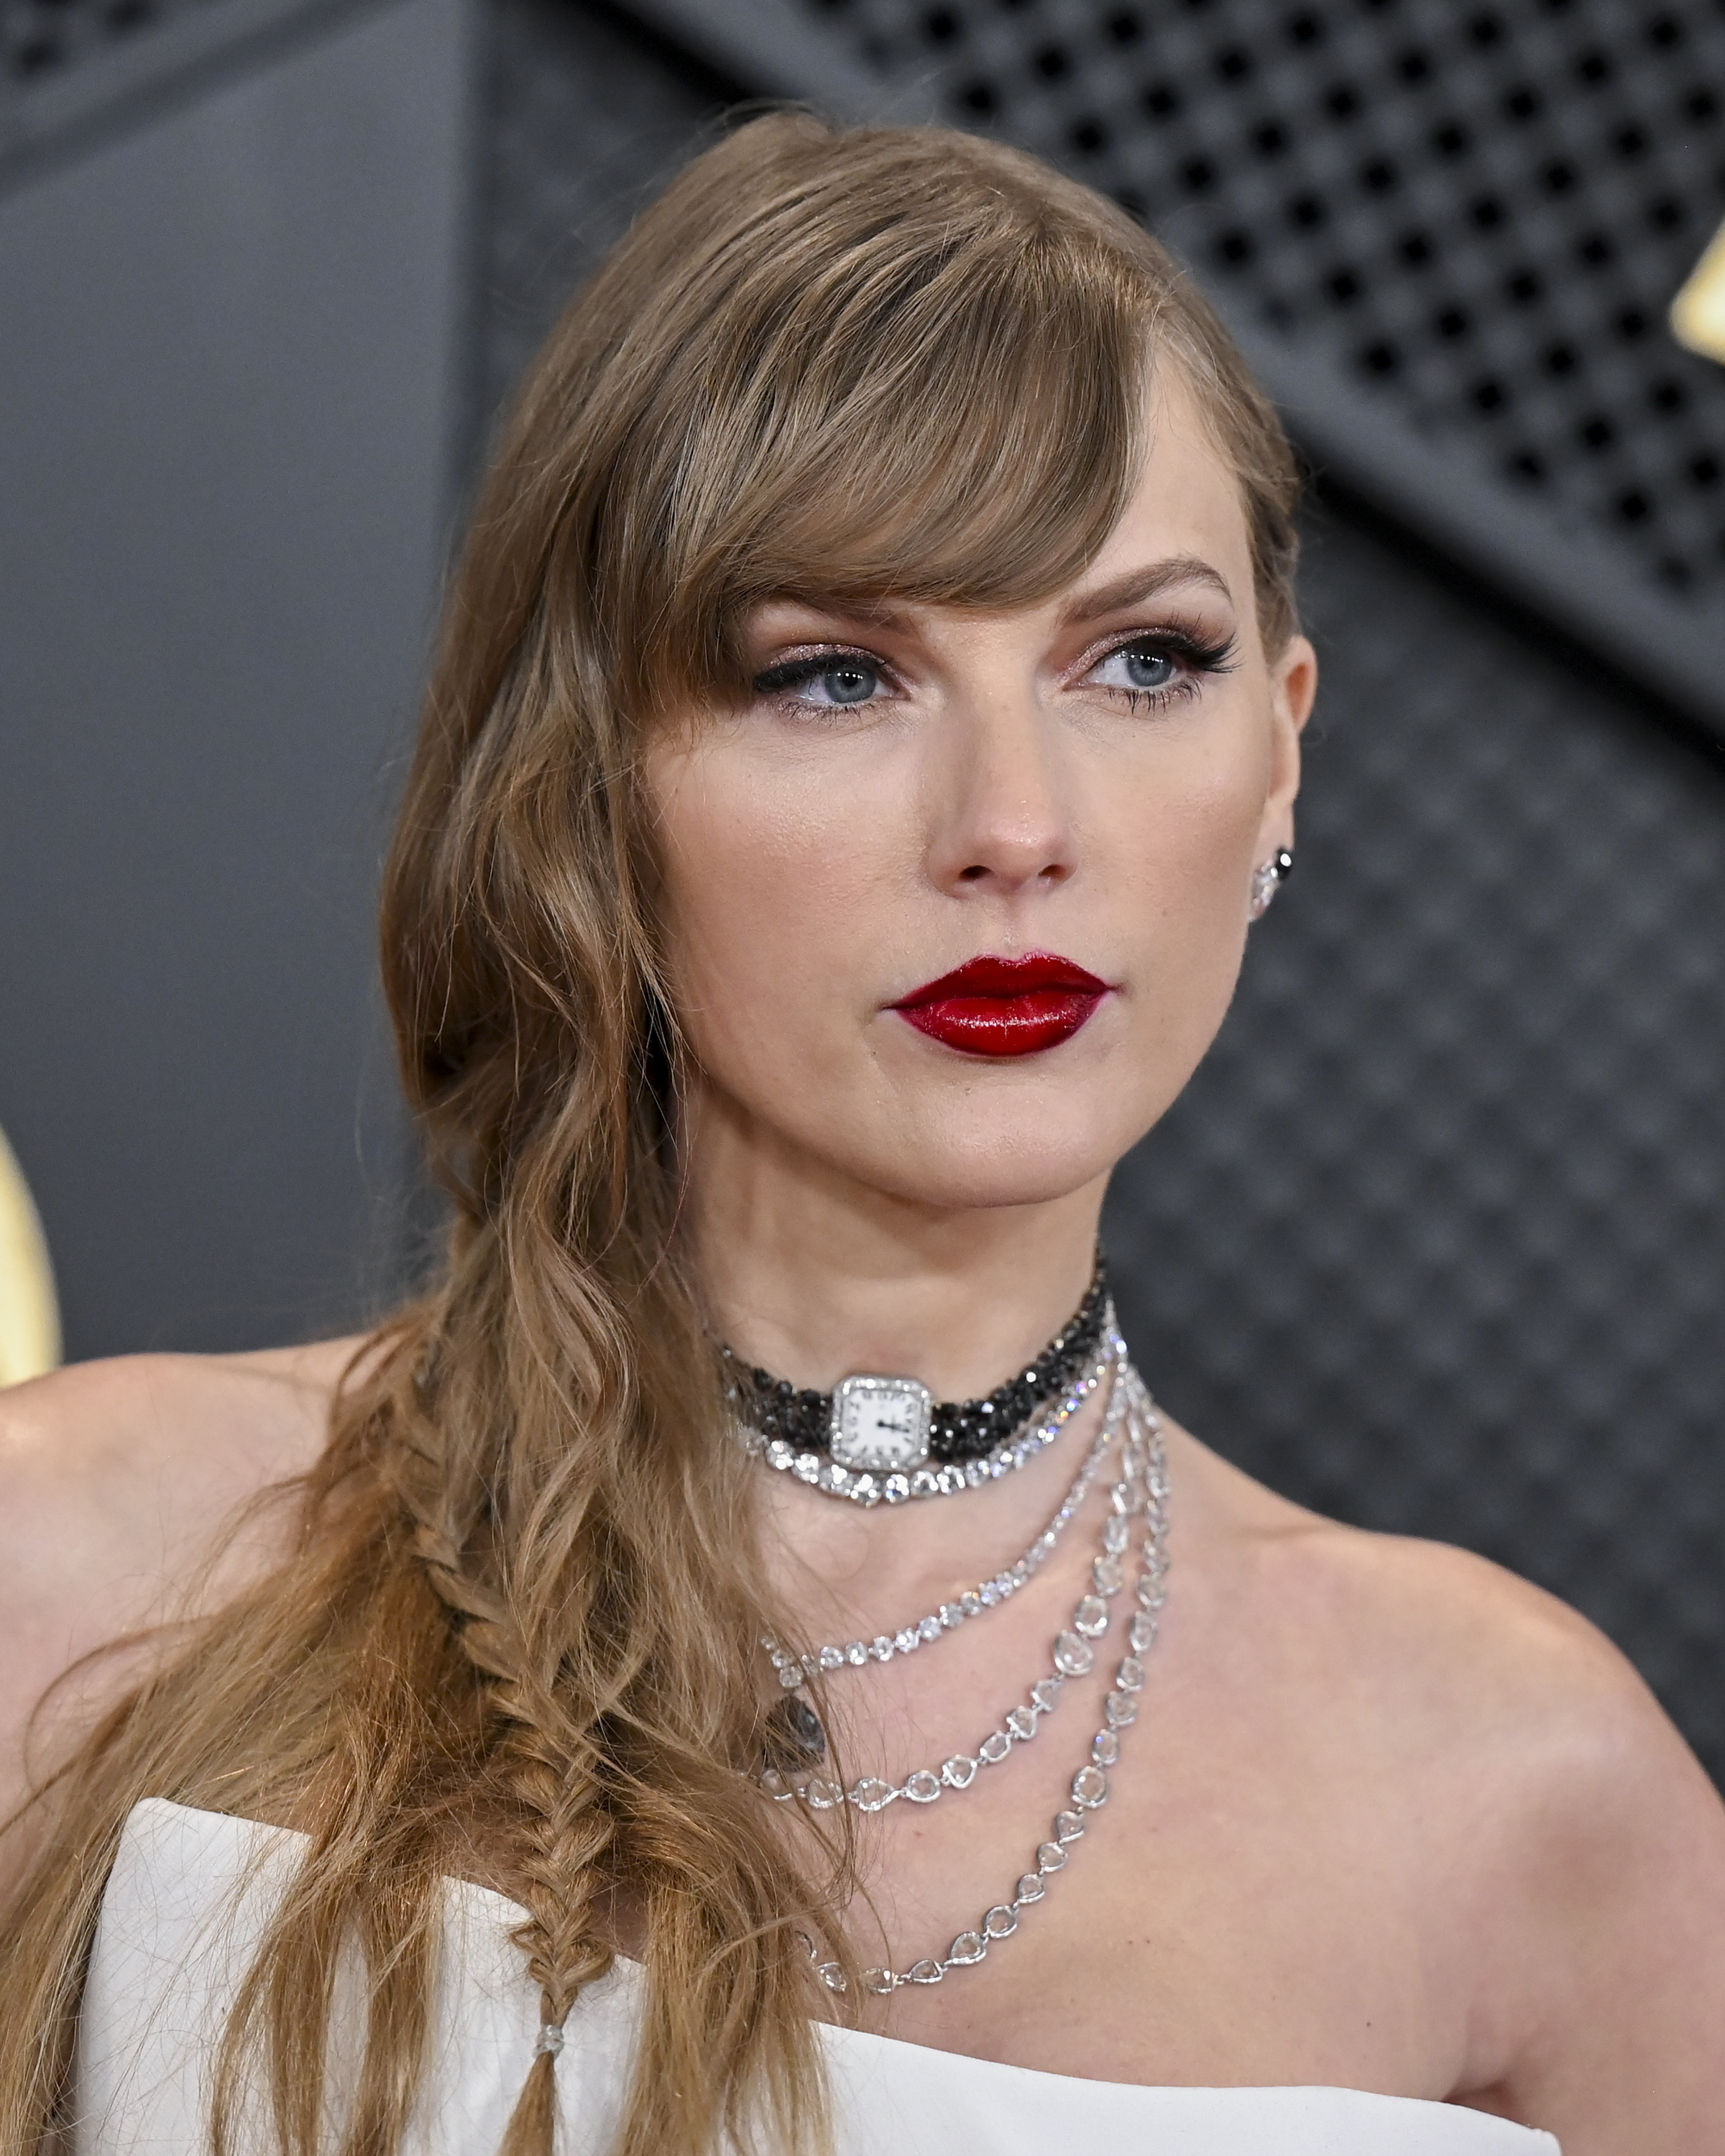 Taylor Swift wearing a strapless gown with a sparkling choker necklace